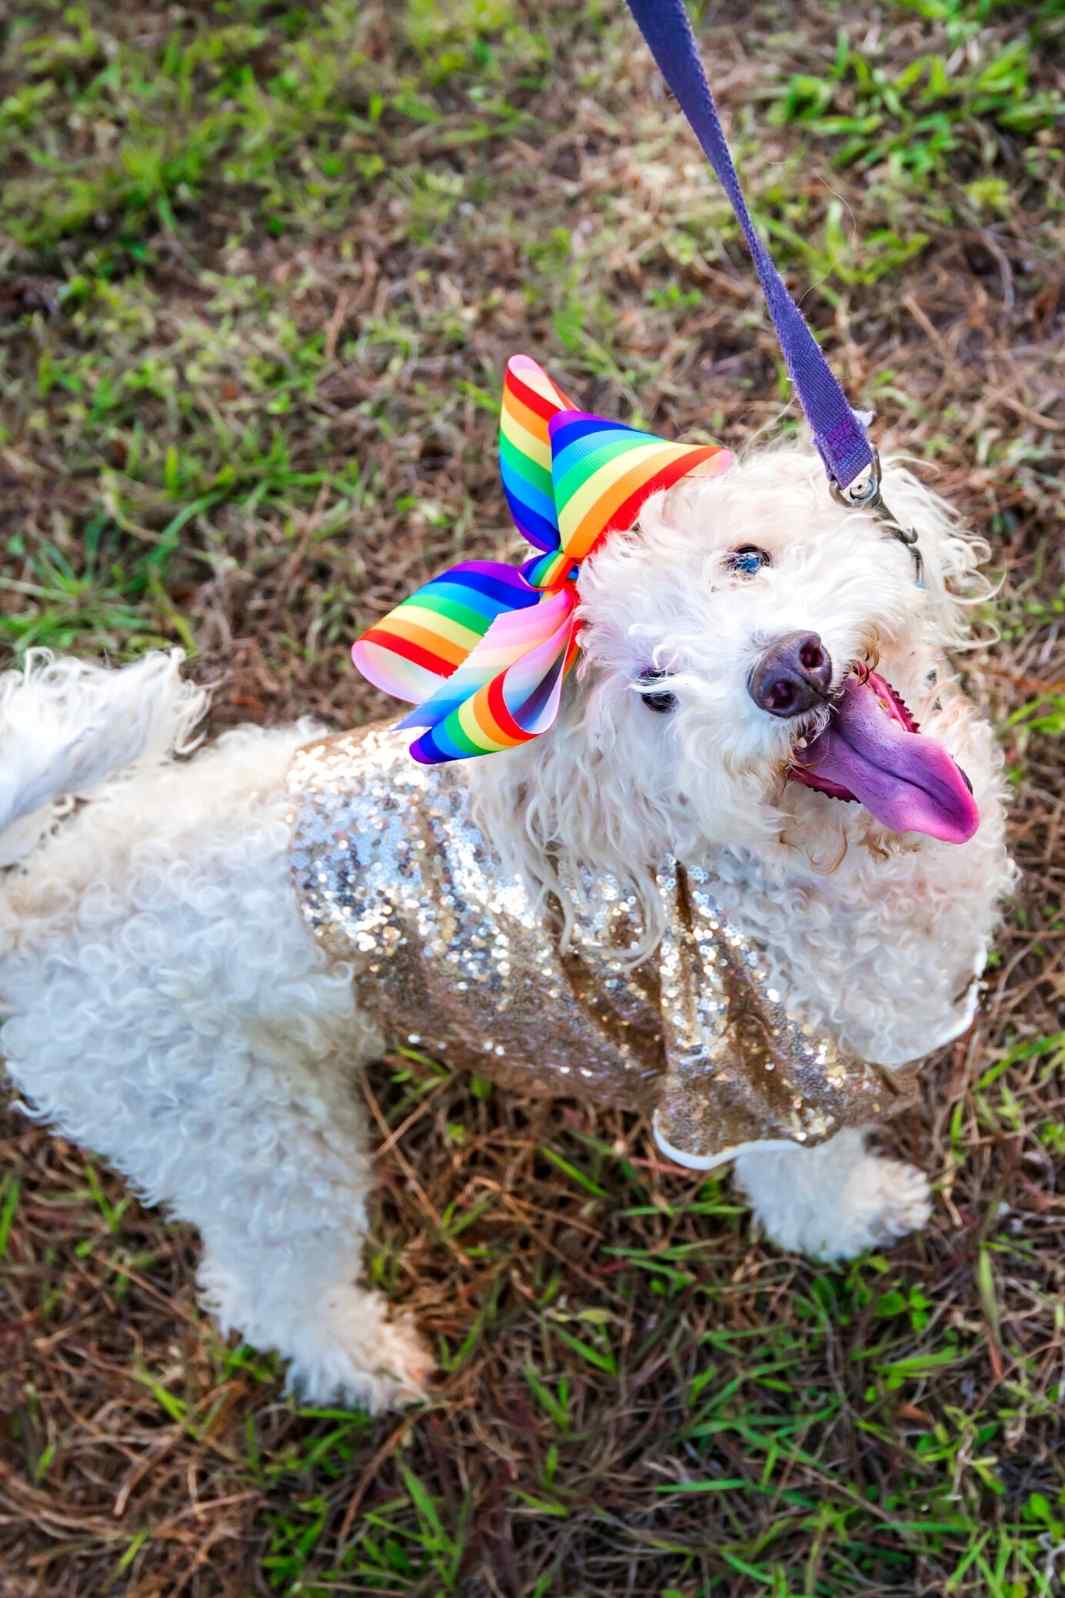 Cute Poodle Mix and rescued dog wearing a rainbow pride hair bow and a gold sequin shirt, celebrating Pride Month June 2022.